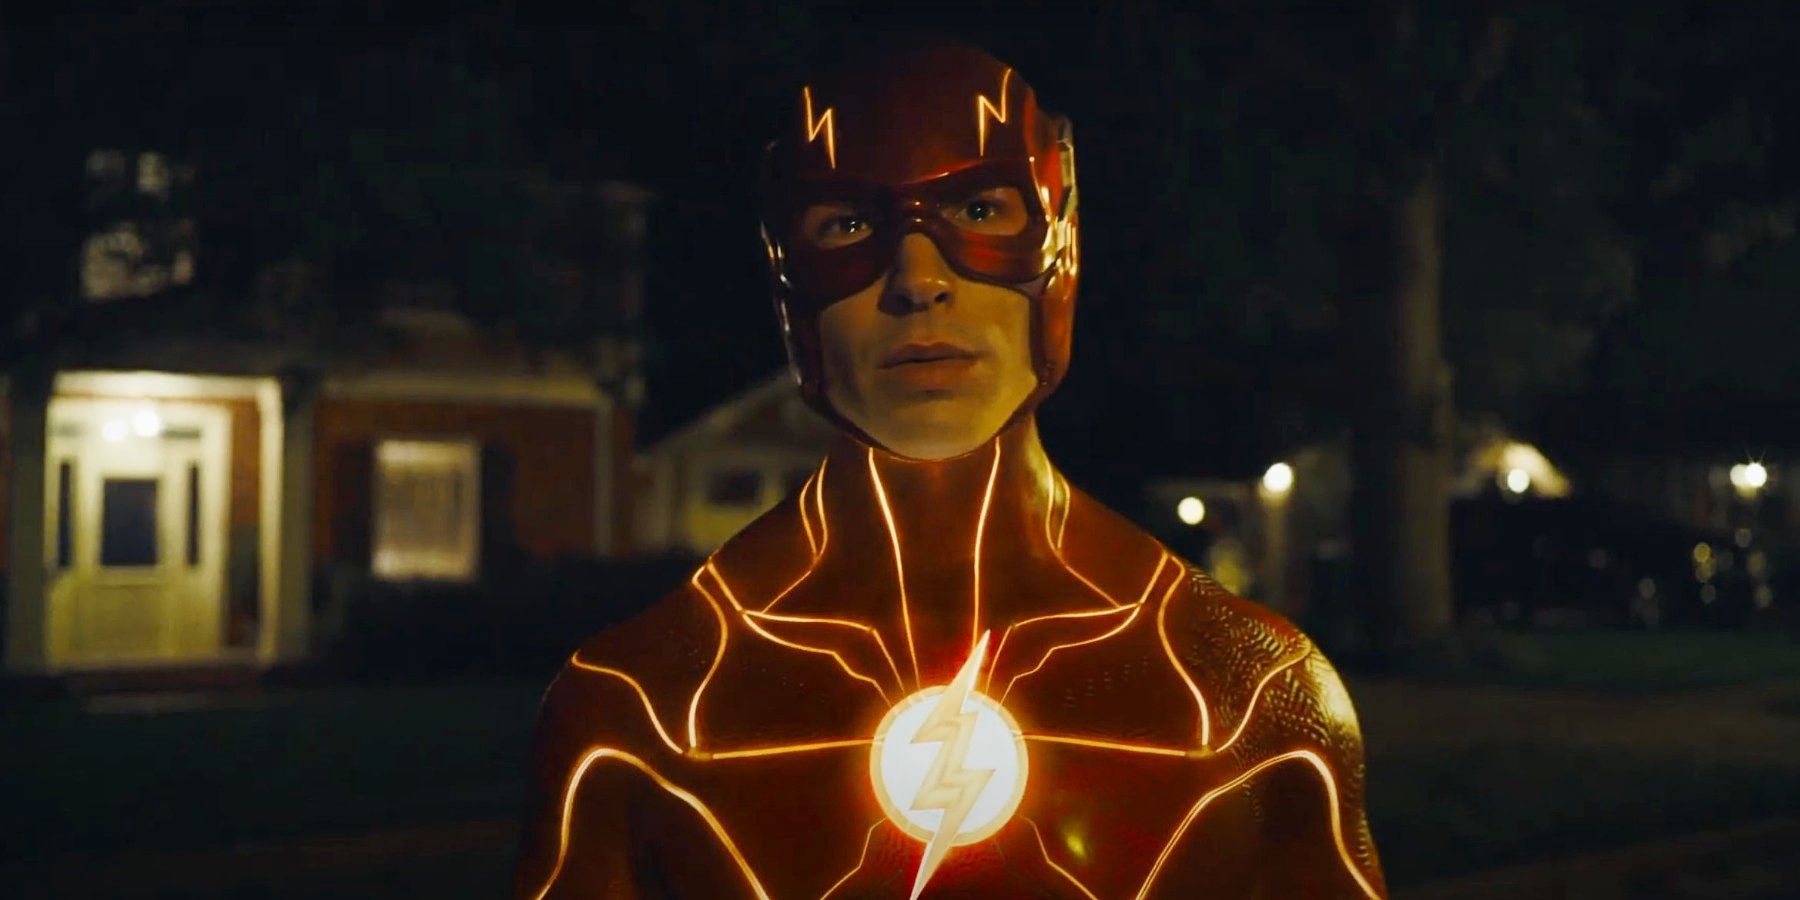 Ezra Miller costume in close-up from The Flash Trailer